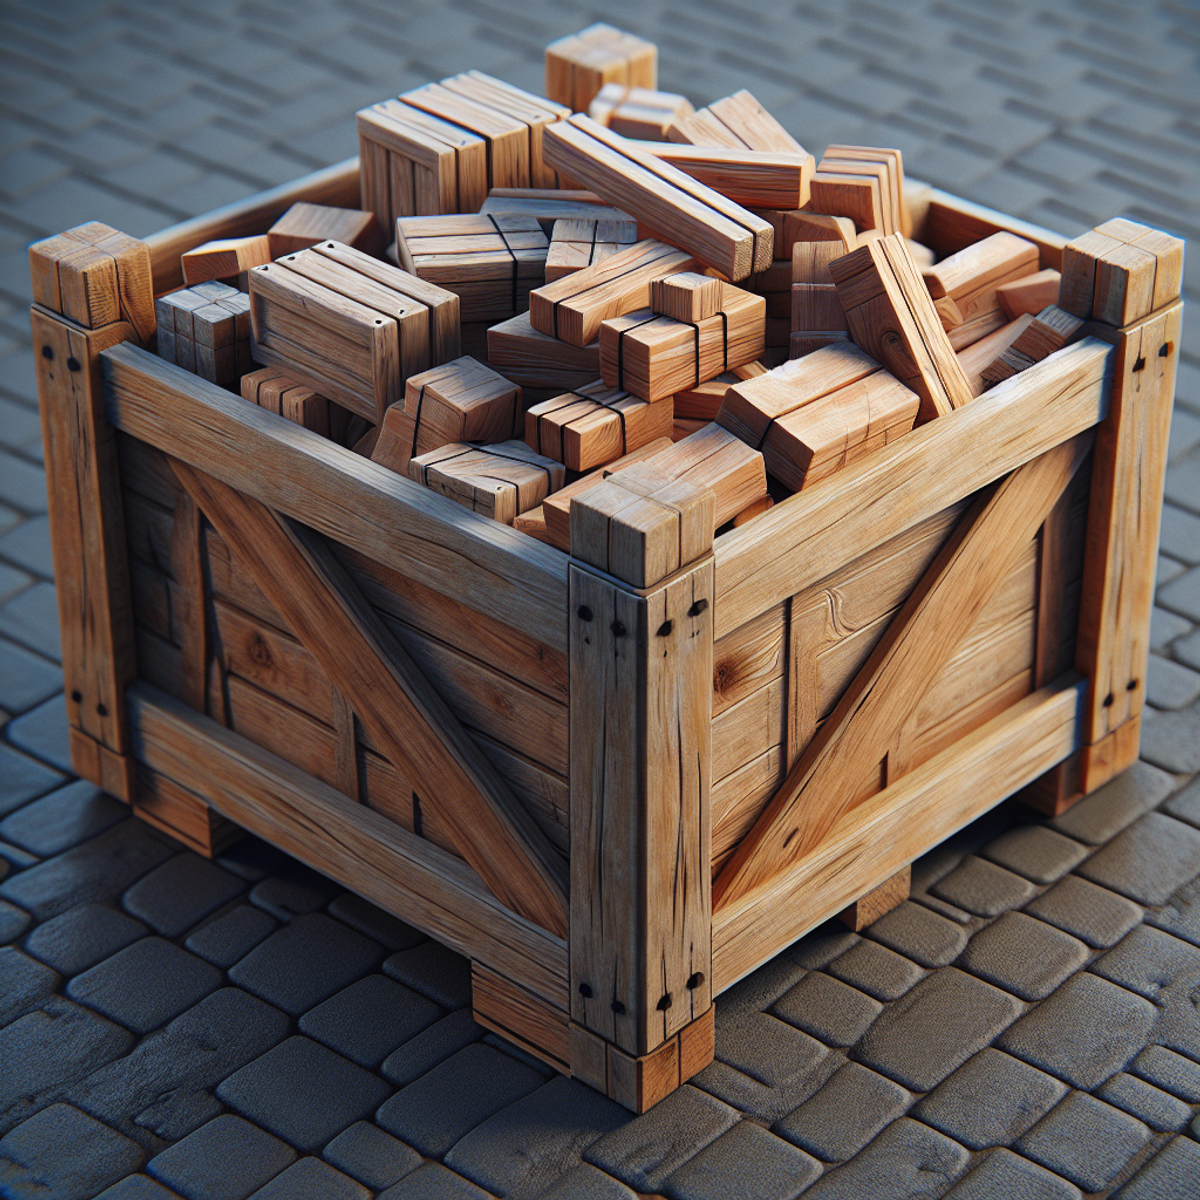 A wooden crate filled with dunnage materials.